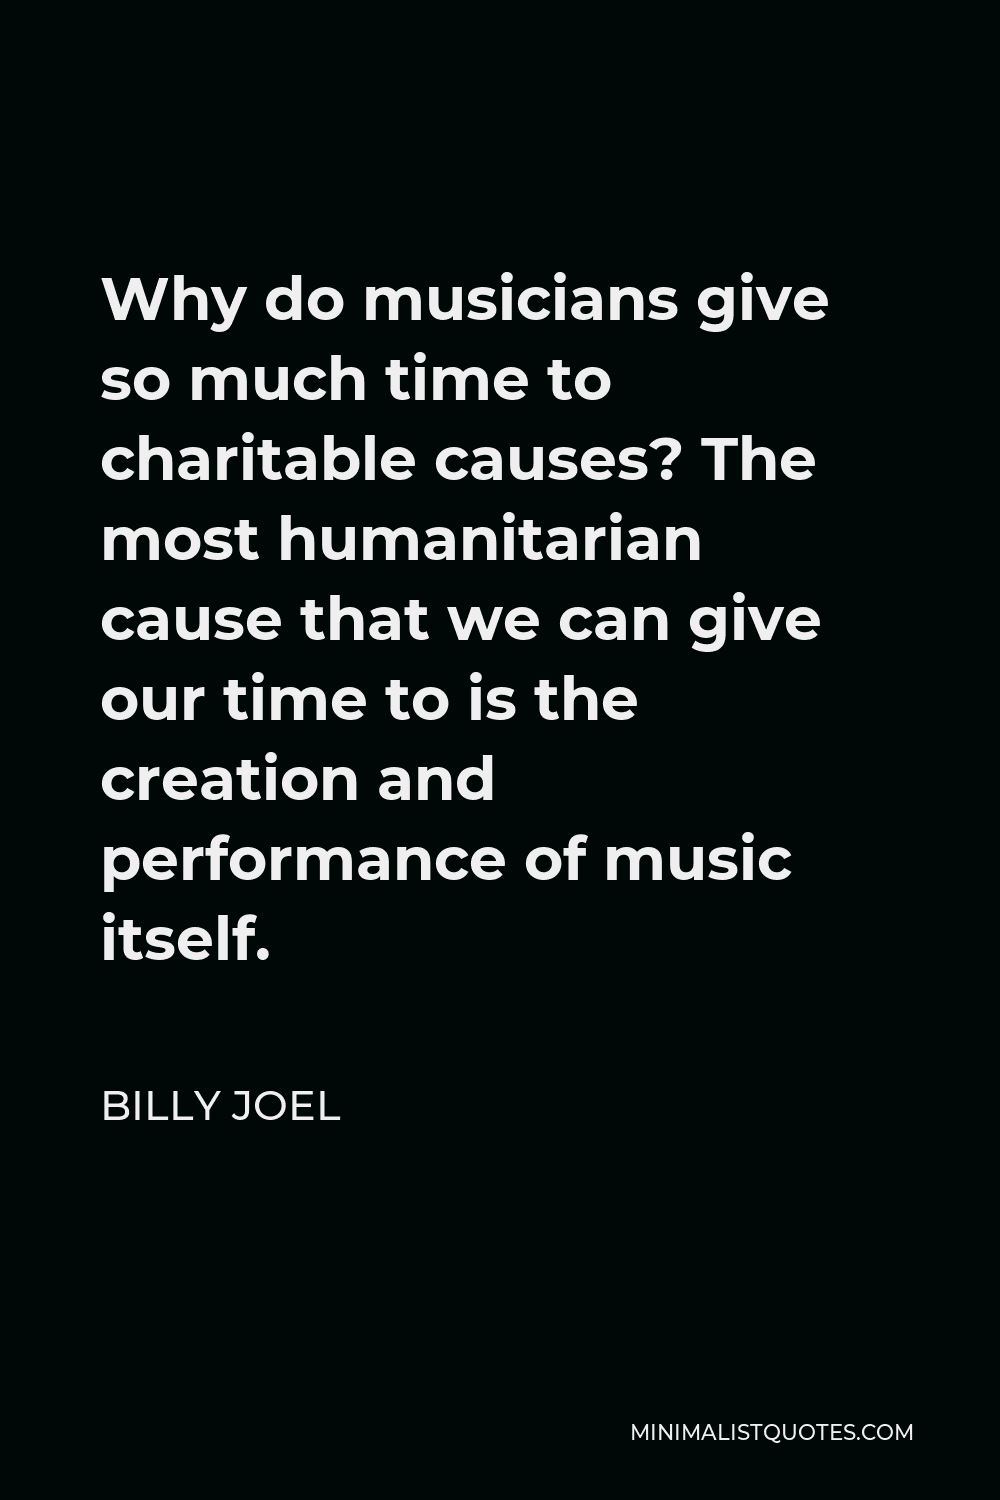 Billy Joel Quote - Why do musicians give so much time to charitable causes? The most humanitarian cause that we can give our time to is the creation and performance of music itself.